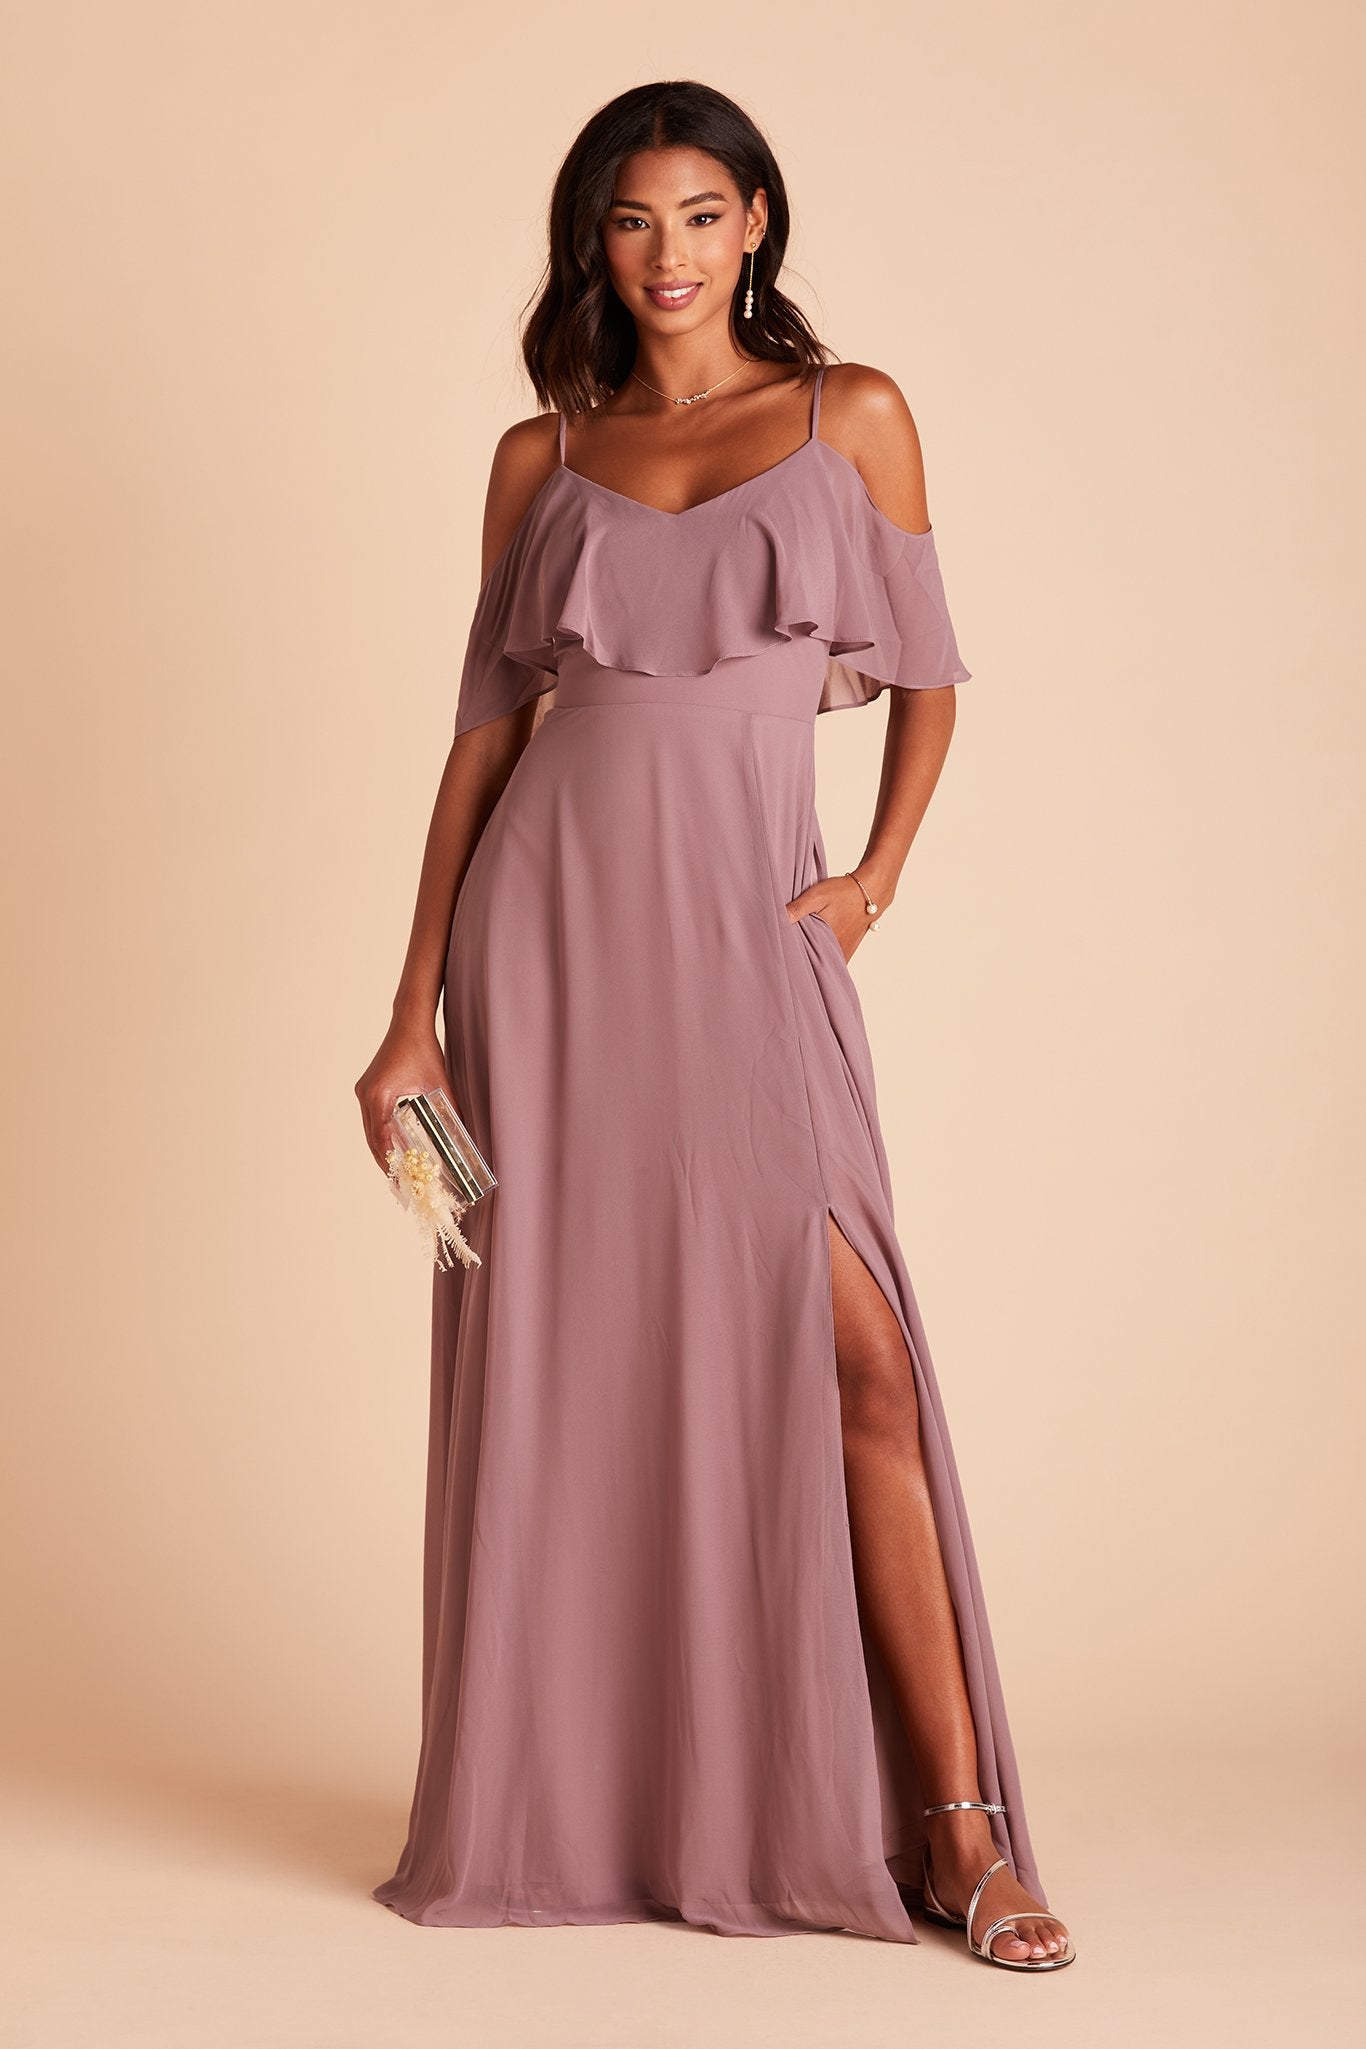 Jane convertible bridesmaid dress with slit in dark mauve chiffon by Birdy Grey, front view with hand in pocket